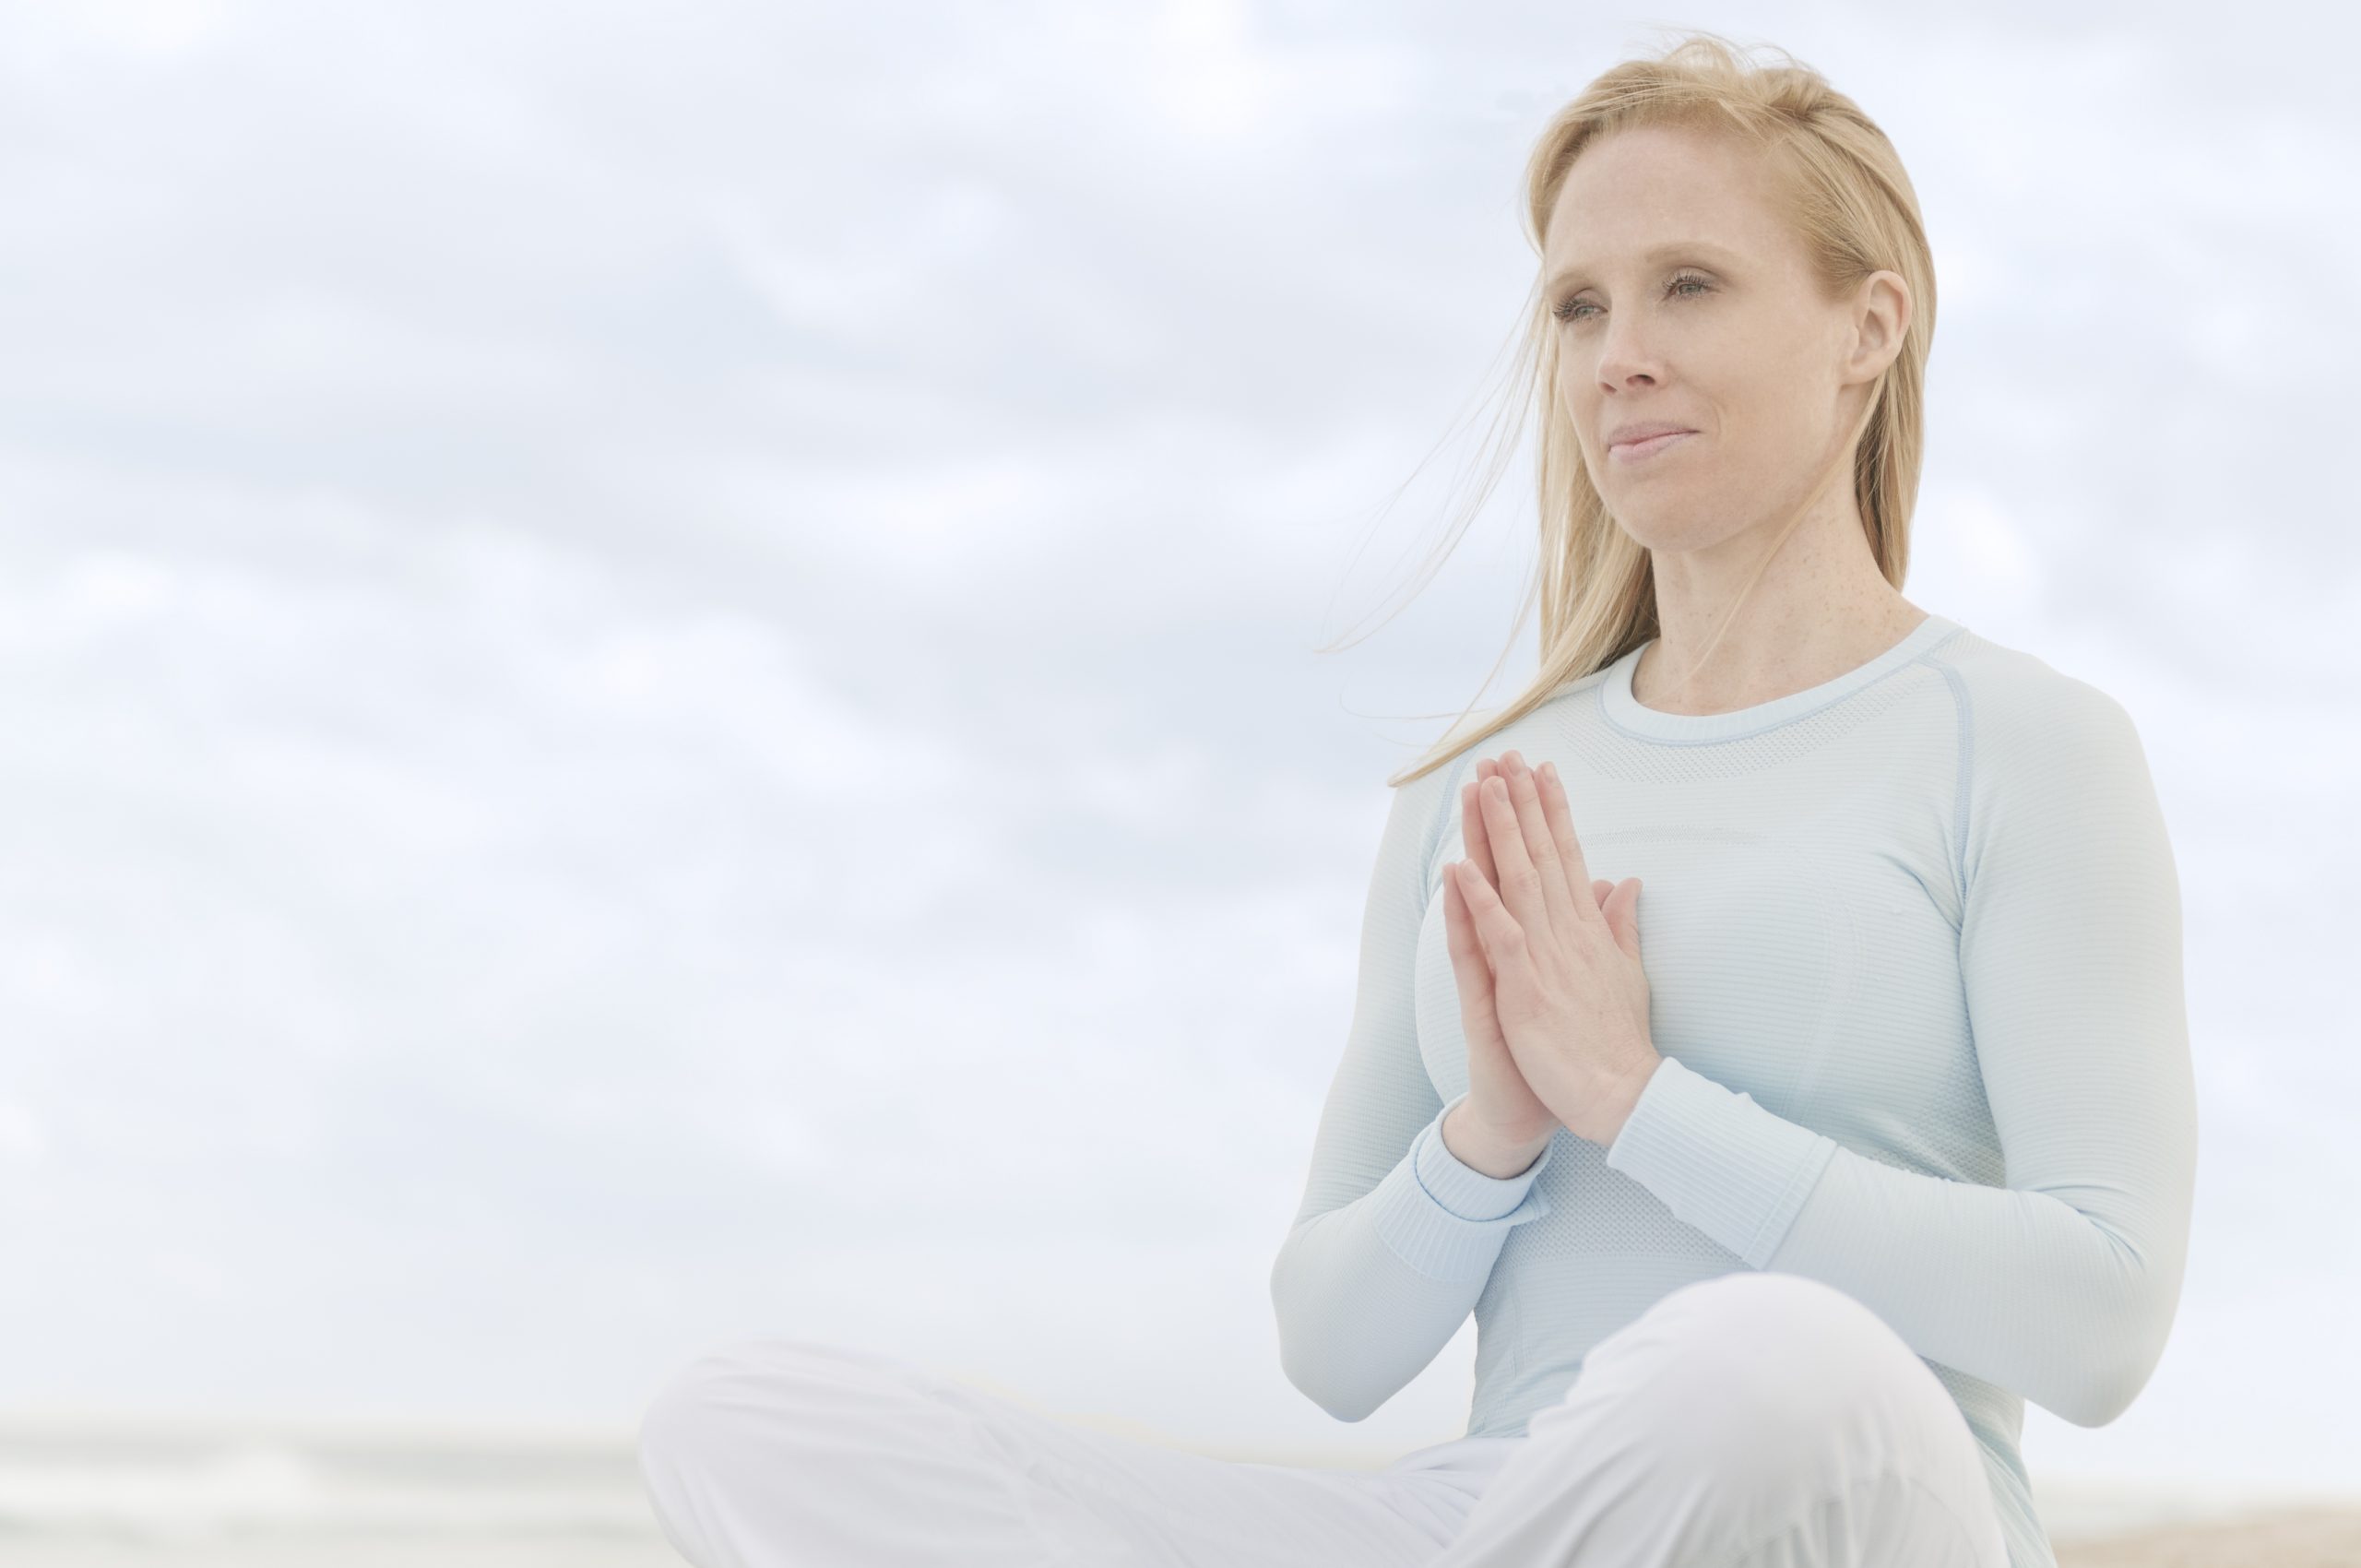 Q&A: Should Yoga Be Practiced When Sick?